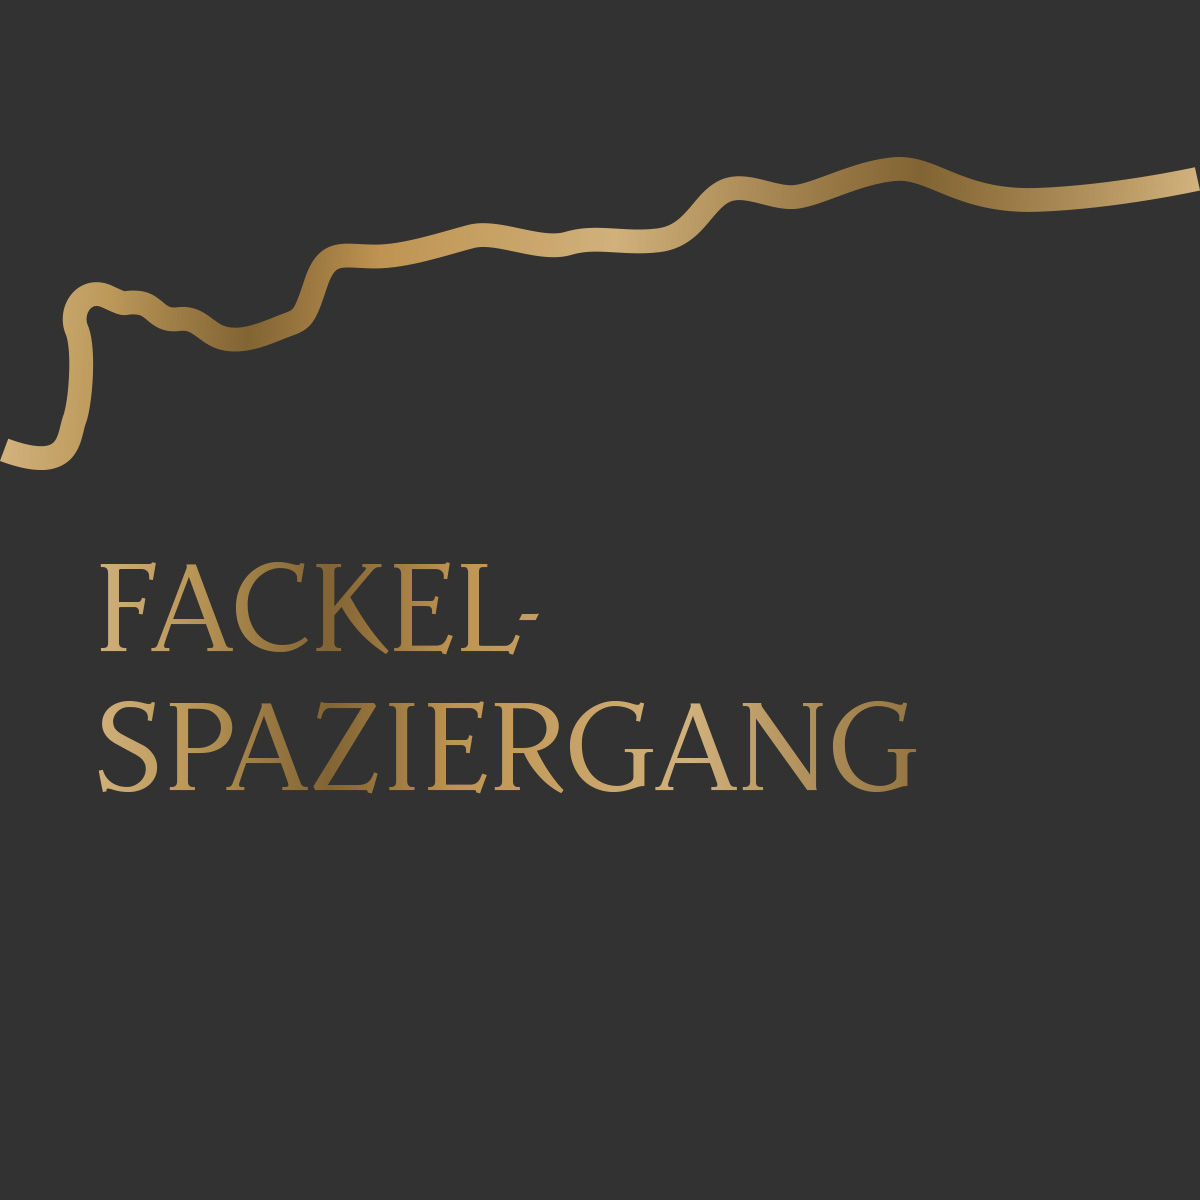 Fackelspaziergang